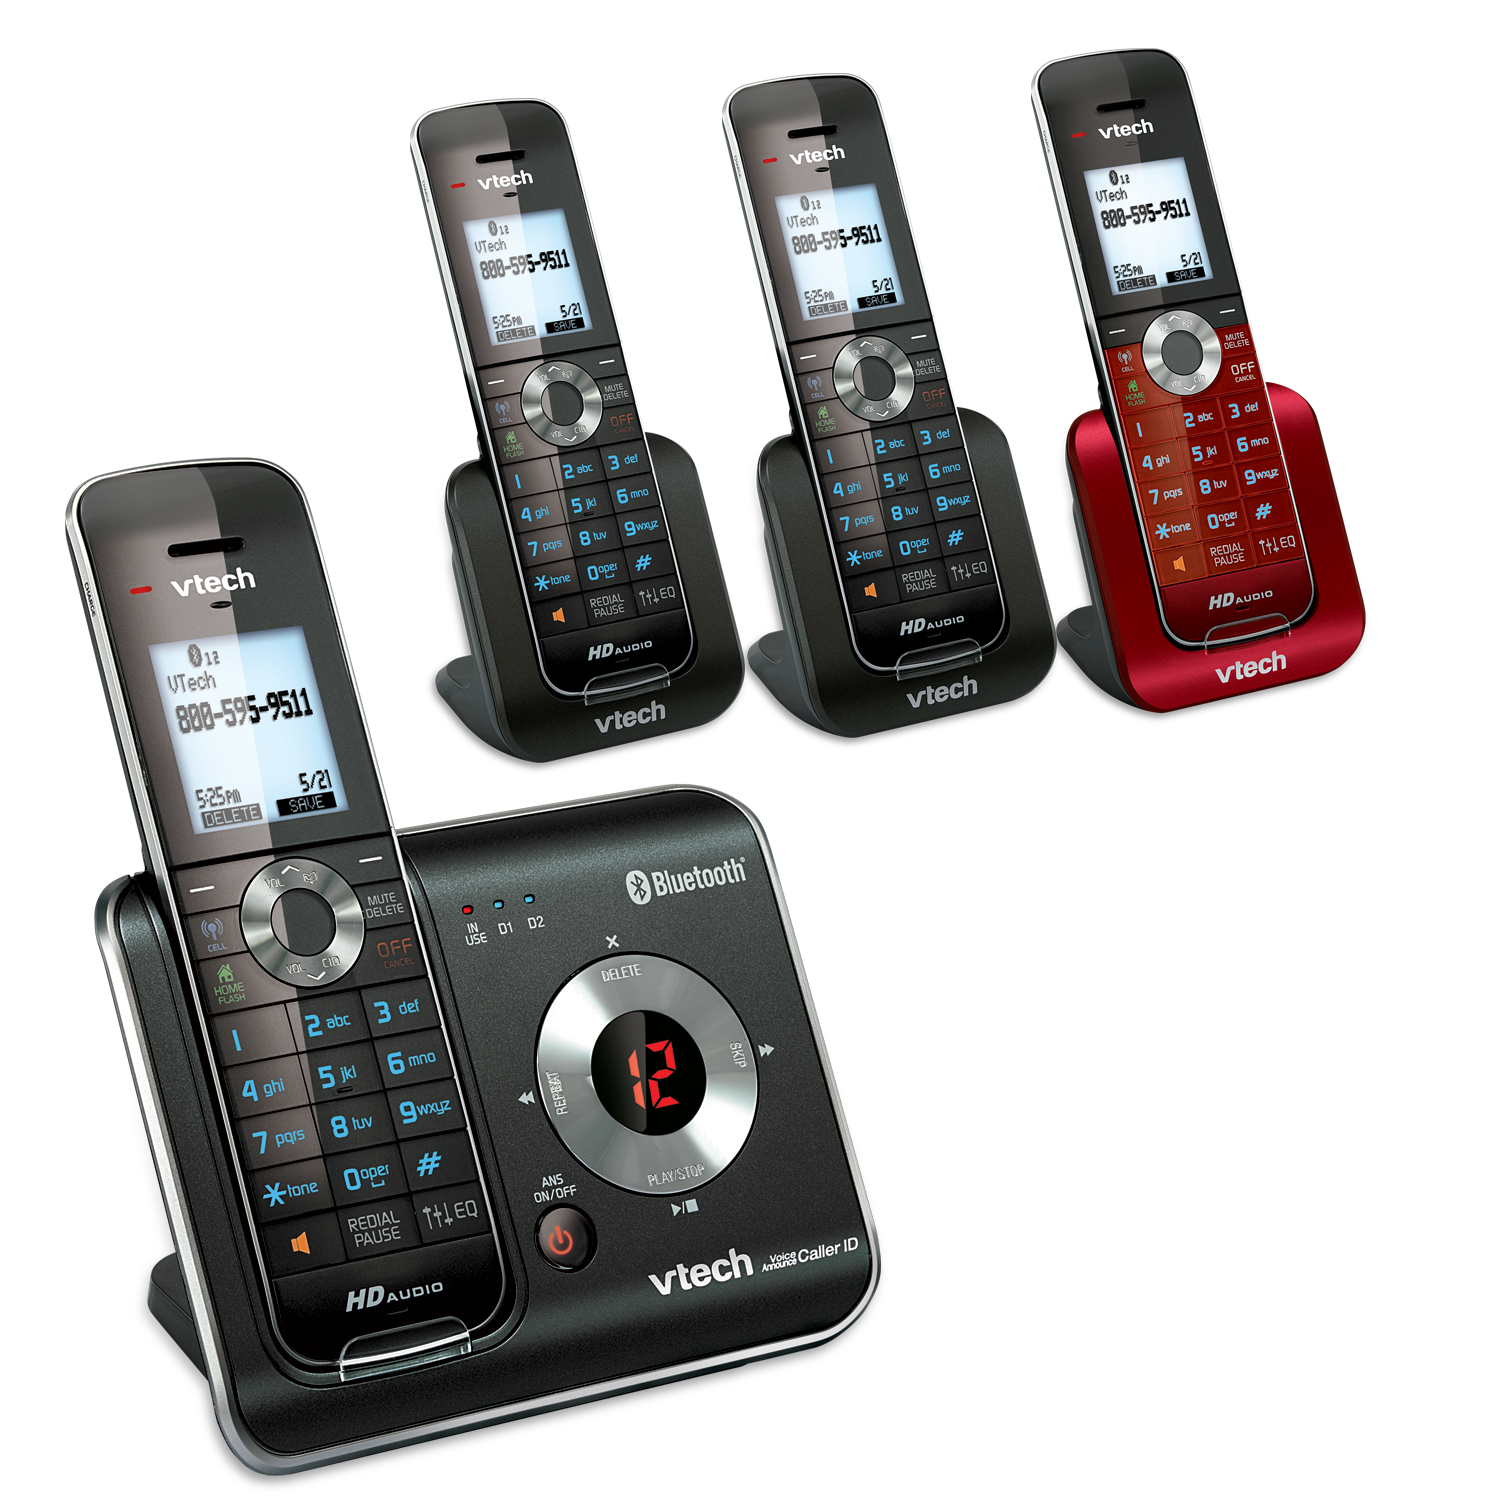 4 Handset Connect to Cell™ Answering System with Caller ID/Call Waiting - view 2